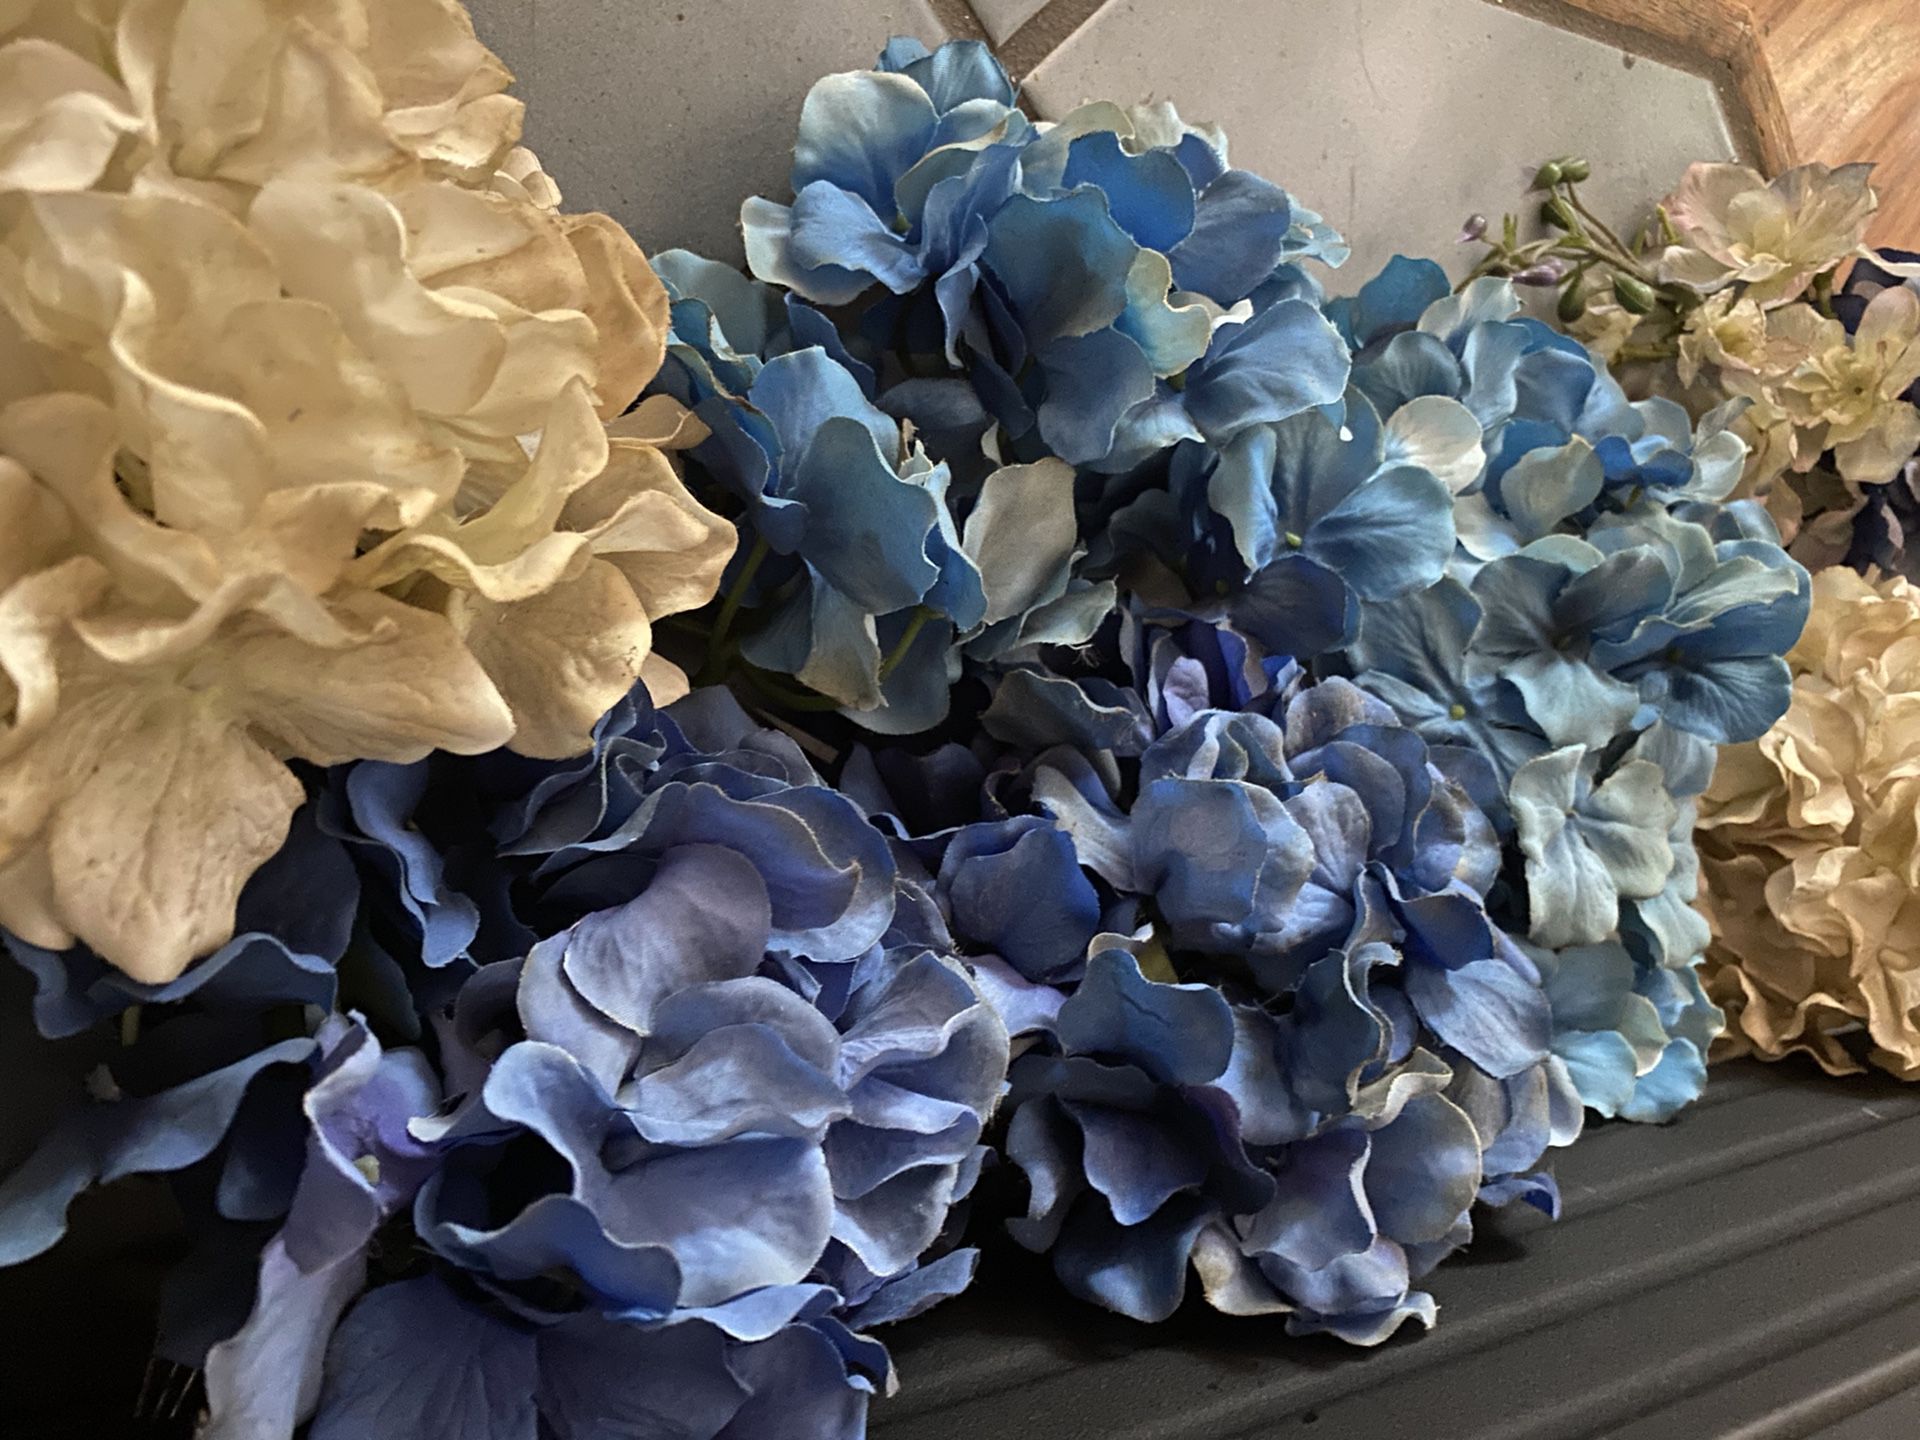 Blue flowers used for decor